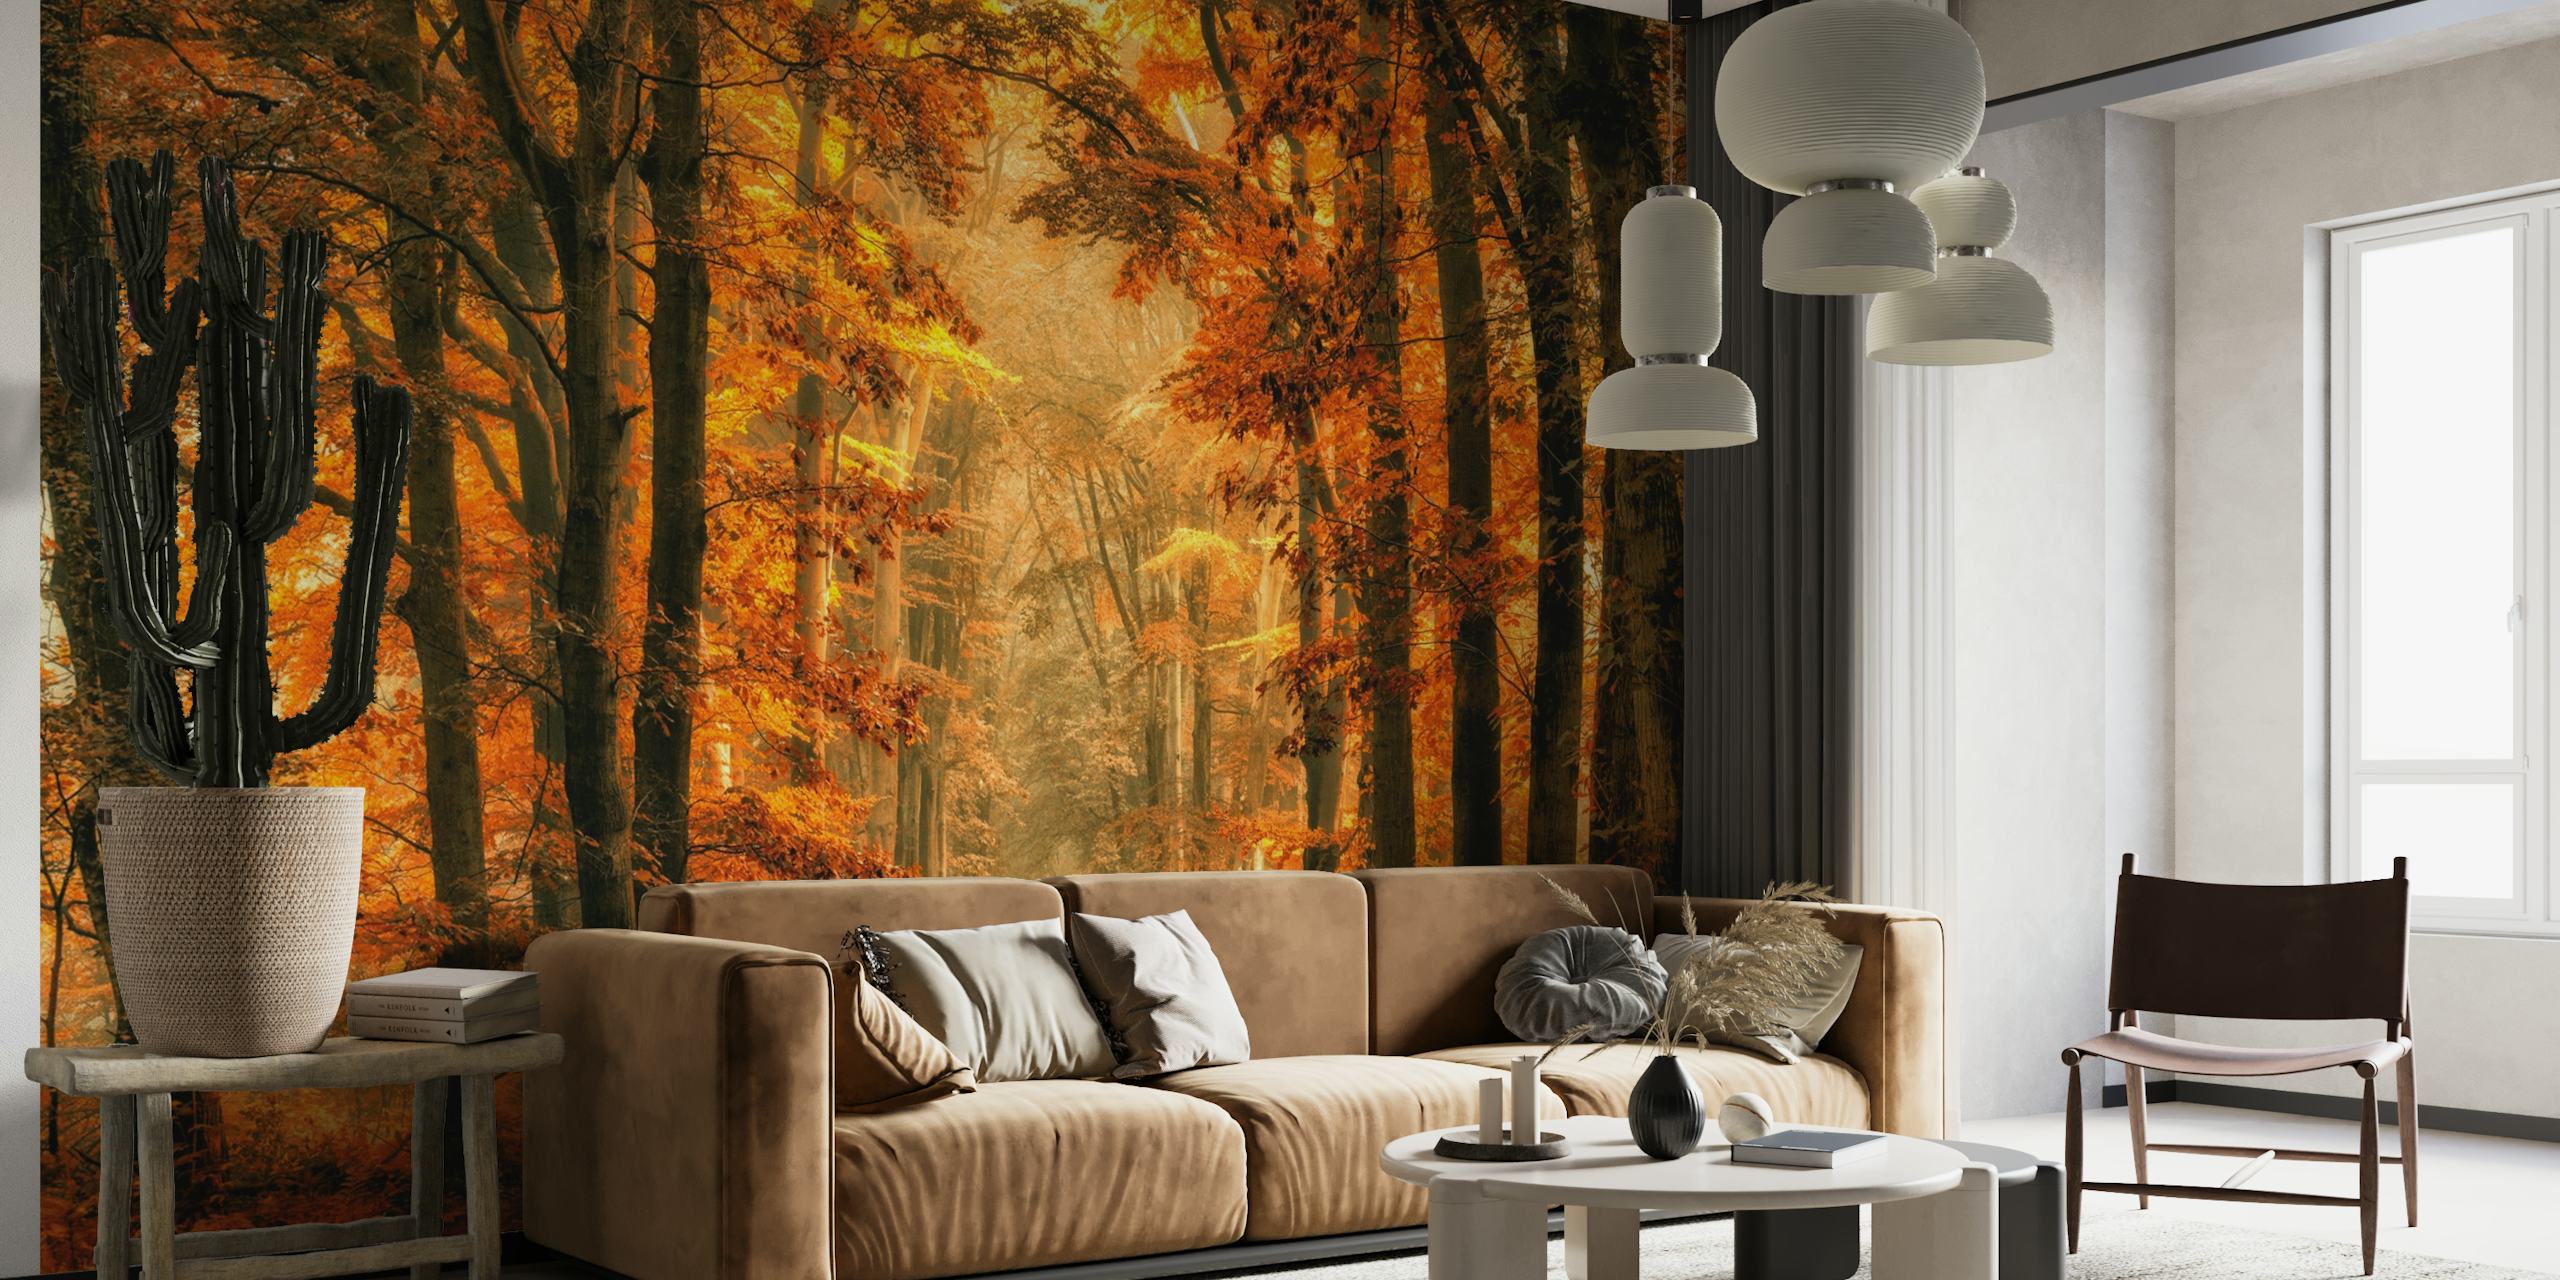 Fantasy forest portal wall mural with autumn colors